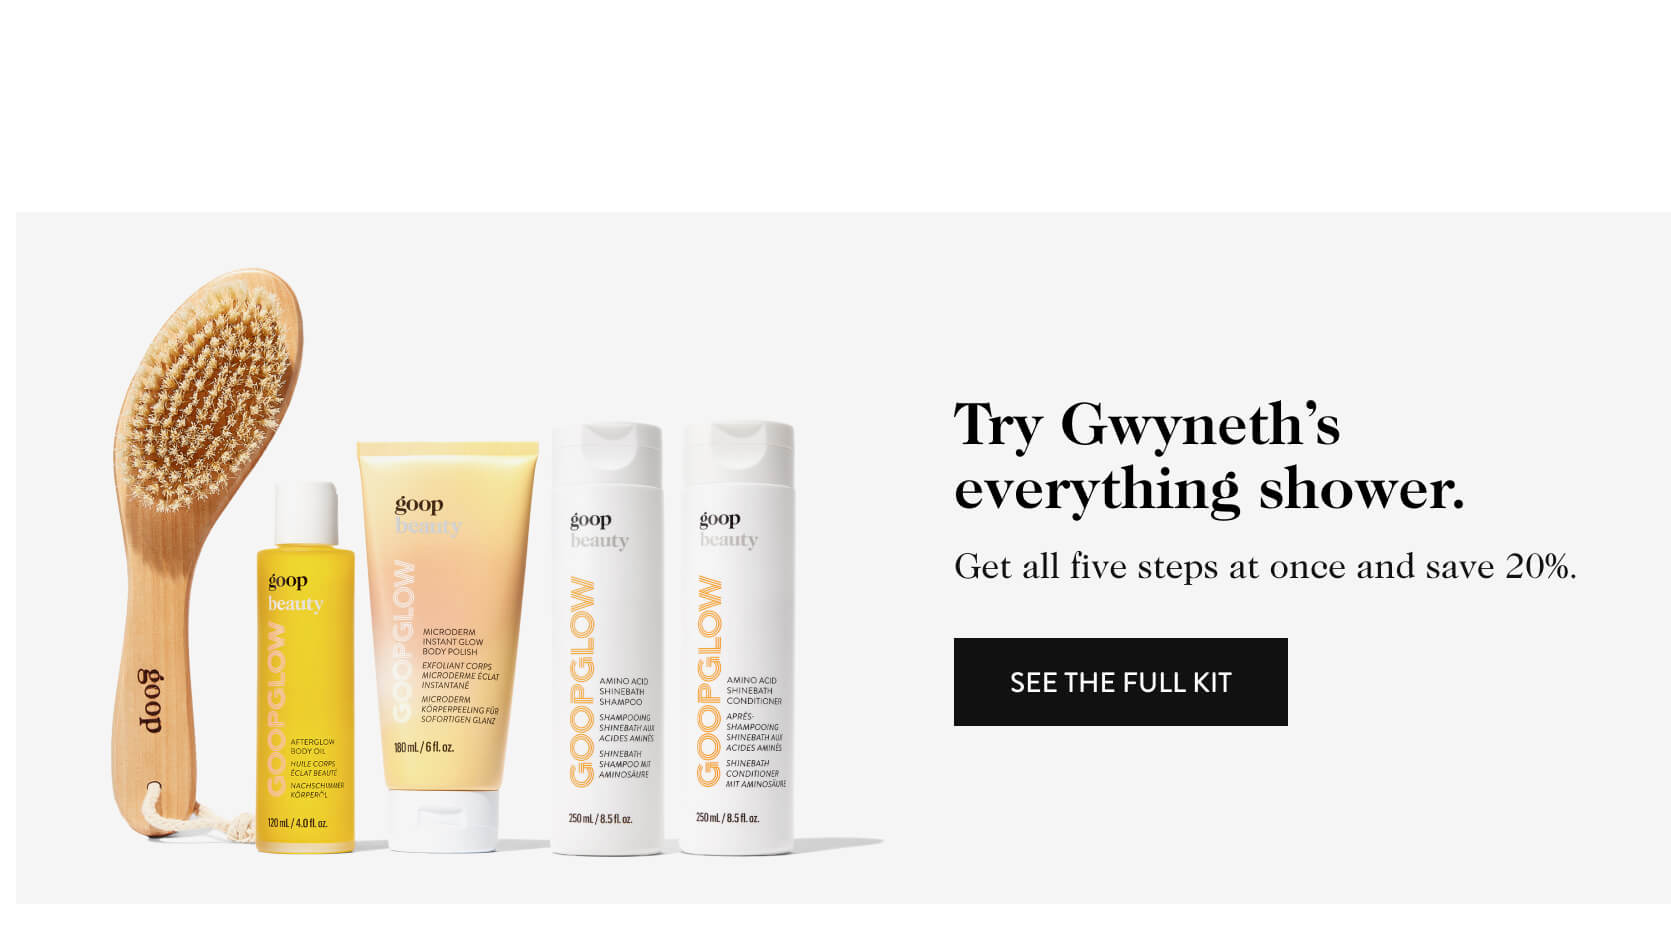 Try Gwyneth’s everything shower. - Get all five steps at once and save 20%. - see THE FULL kit